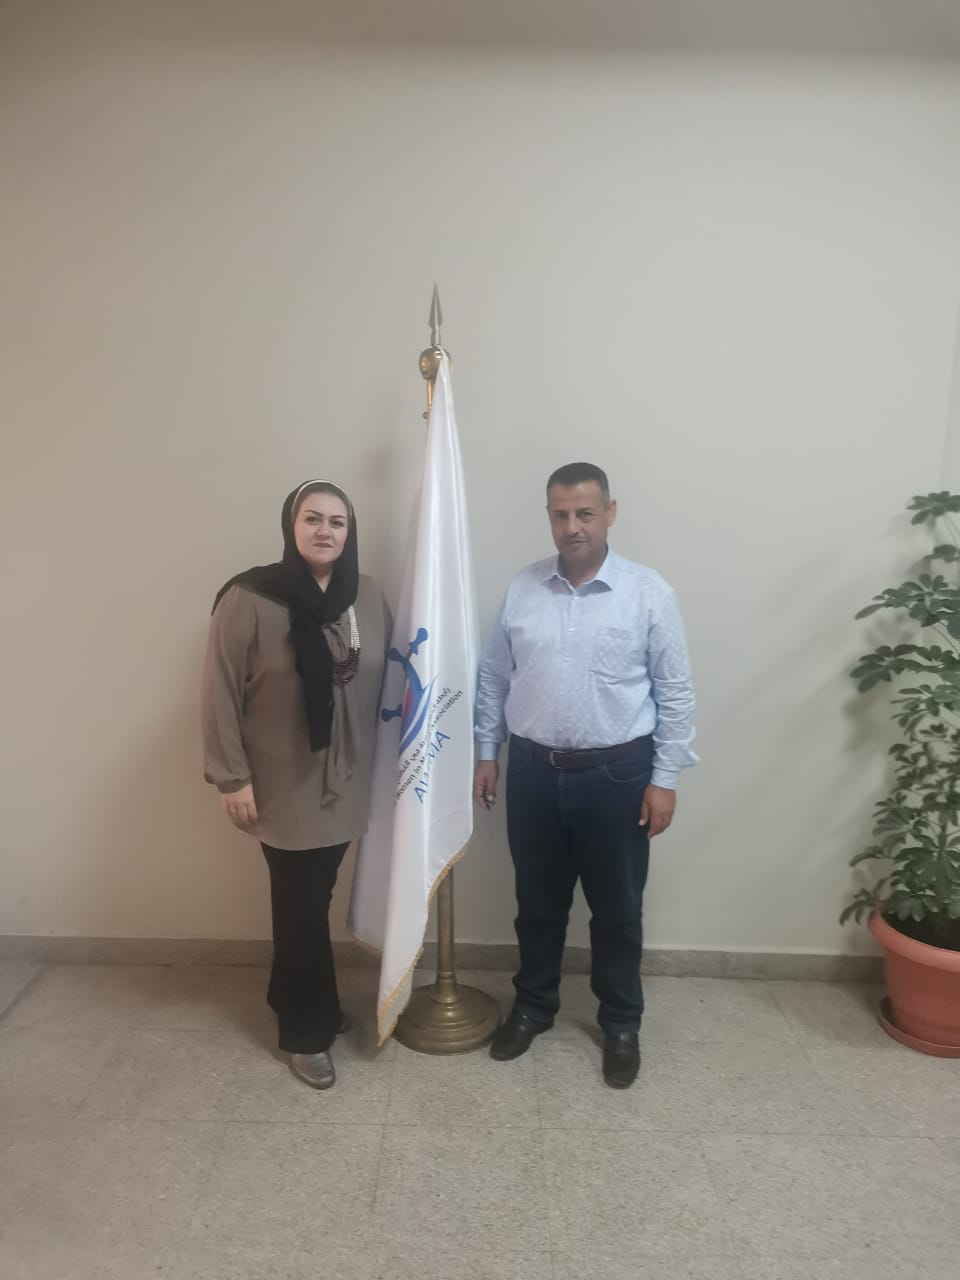 The visit of Mr. Ahmed Al-Fawaz, Director of Development and Training in the Ports Administration and Operation - Aqaba Company, at the headquarters of the General Secretariat in the headquarters country, the Arab Republic of Egypt, to discuss ways of joint cooperation